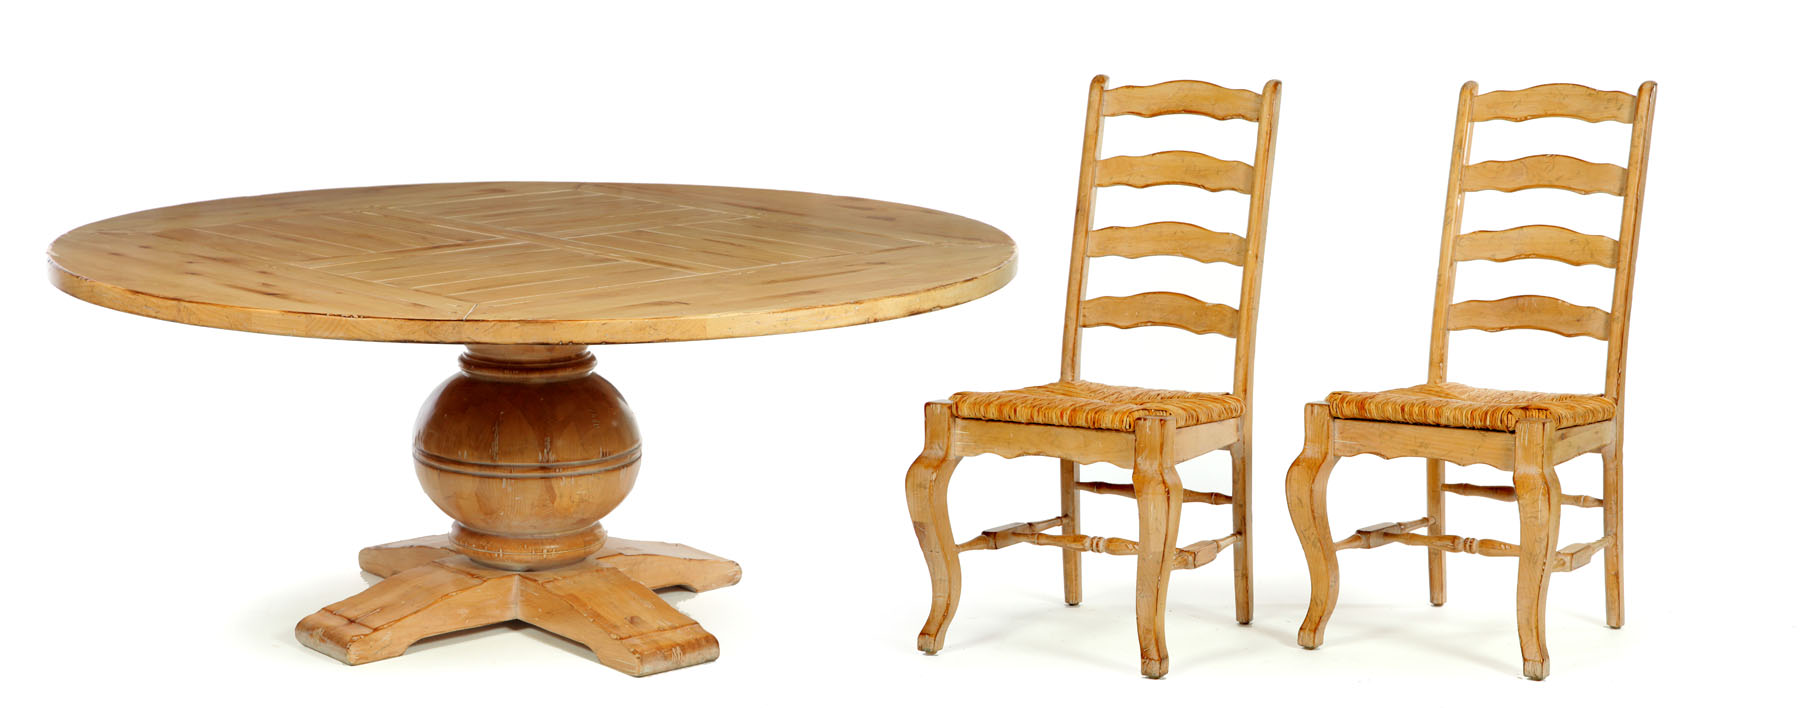 GENEROUS ROUND DINING TABLE WITH